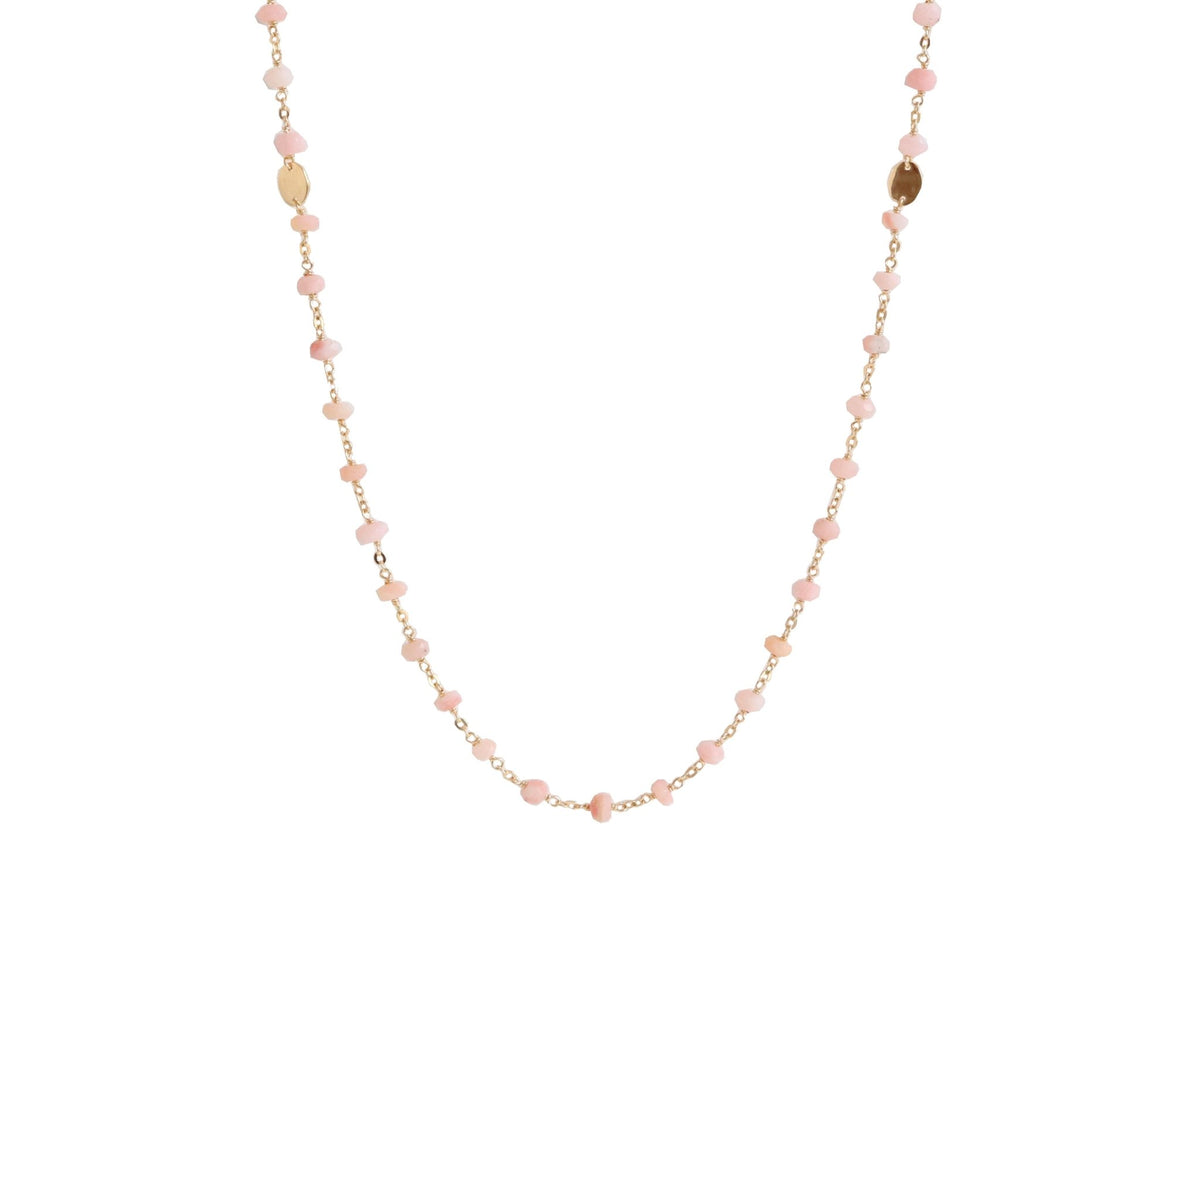 ICONIC MIDI BEADED NECKLACE - PINK OPAL &amp; GOLD 24-25&quot; - SO PRETTY CARA COTTER